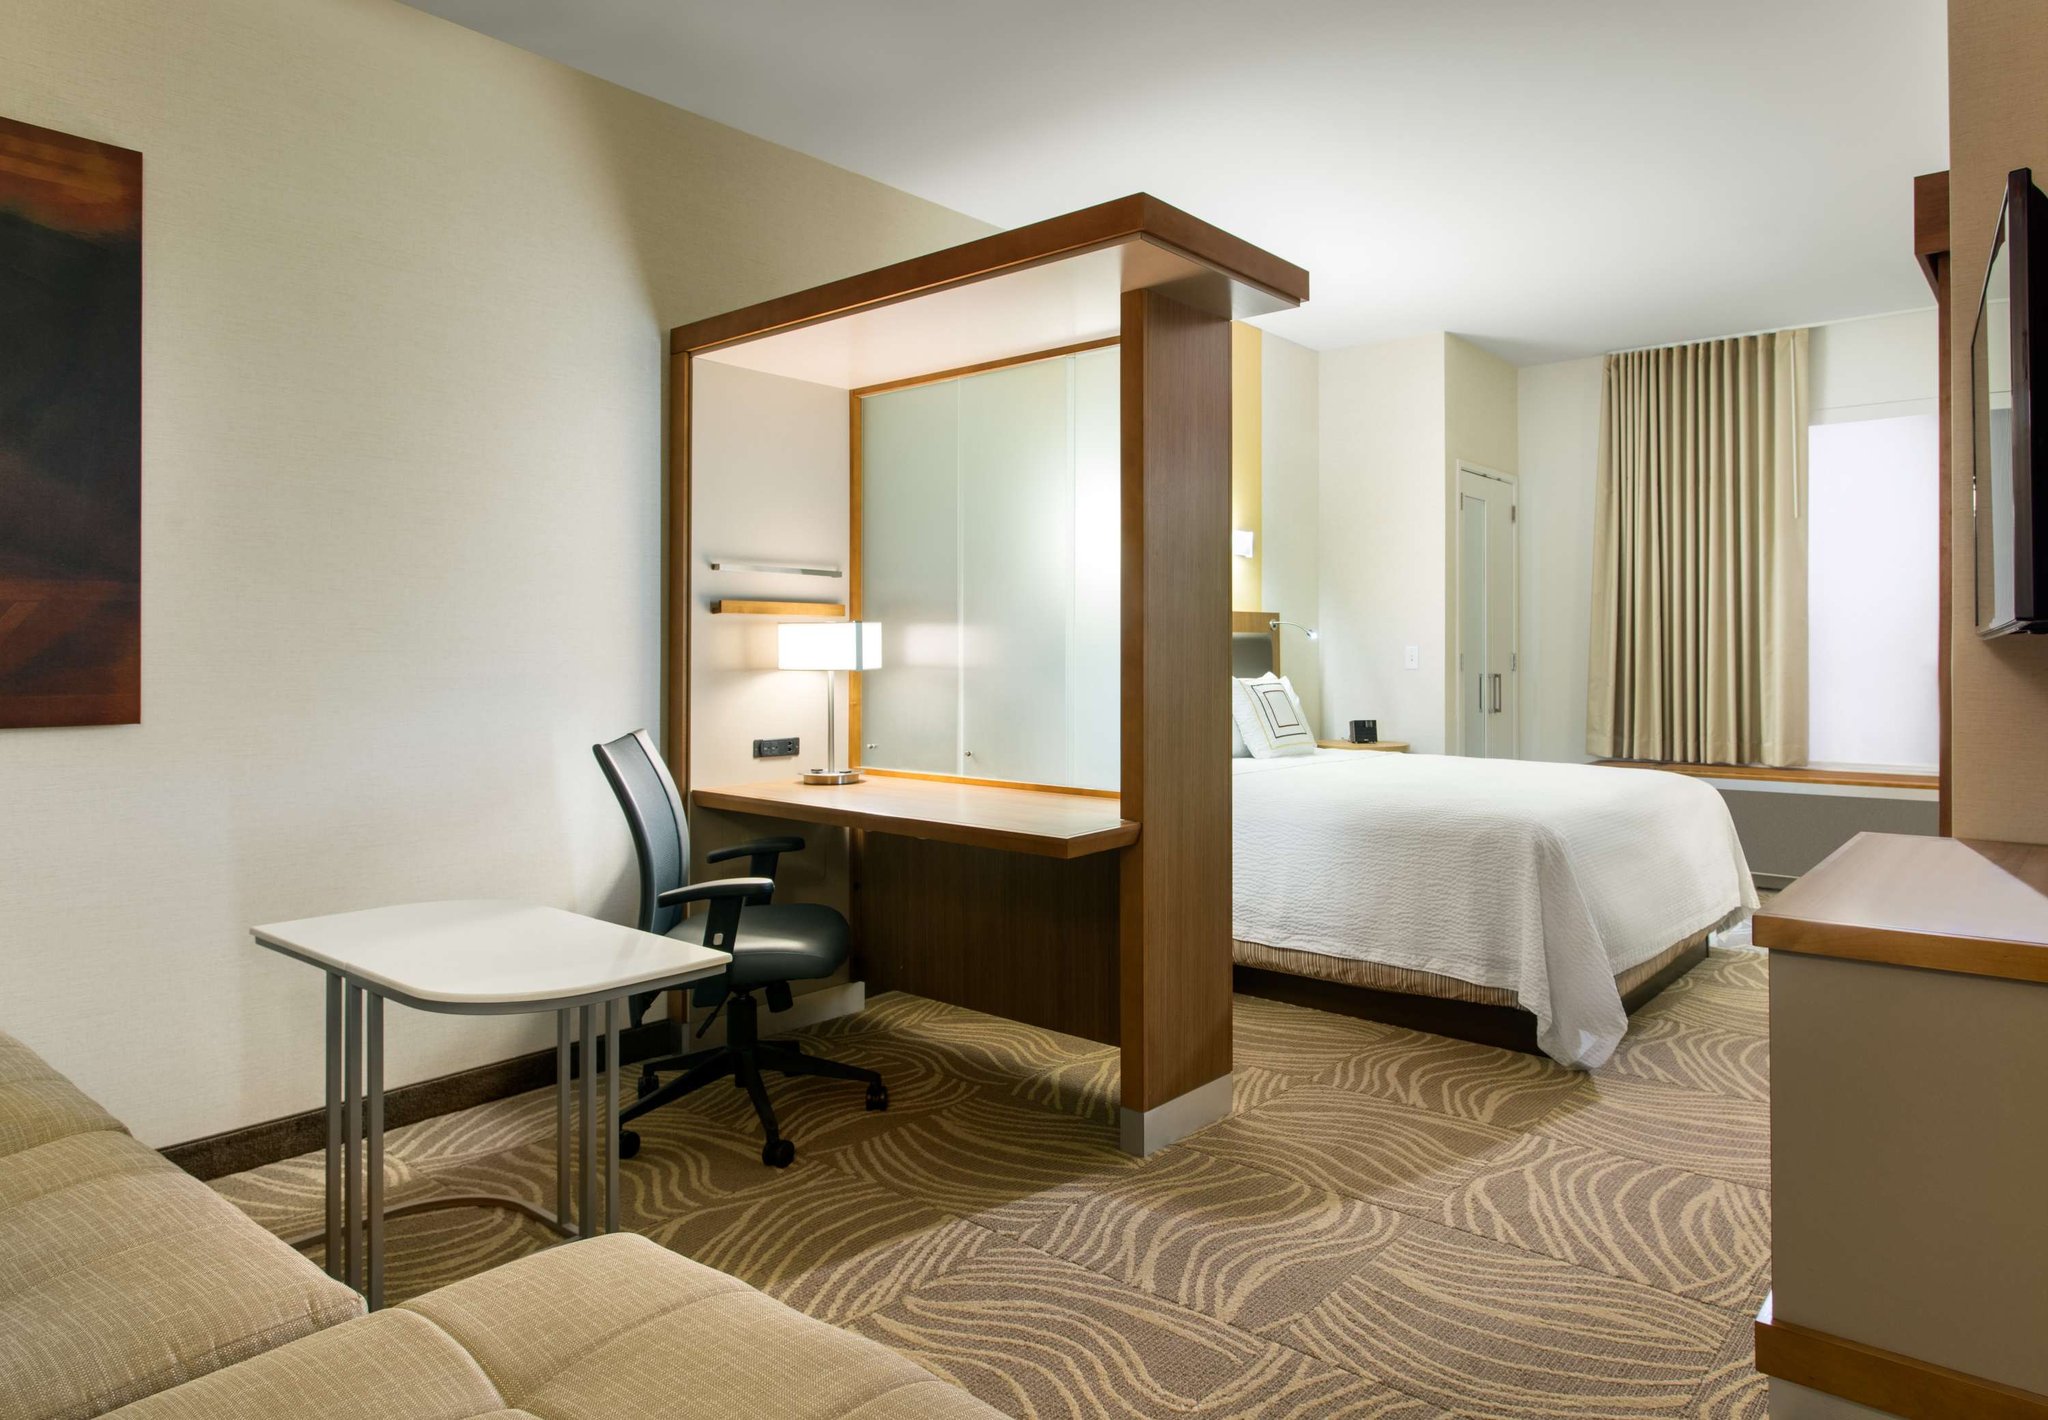 SpringHill Suites Los Angeles Burbank/Downtown